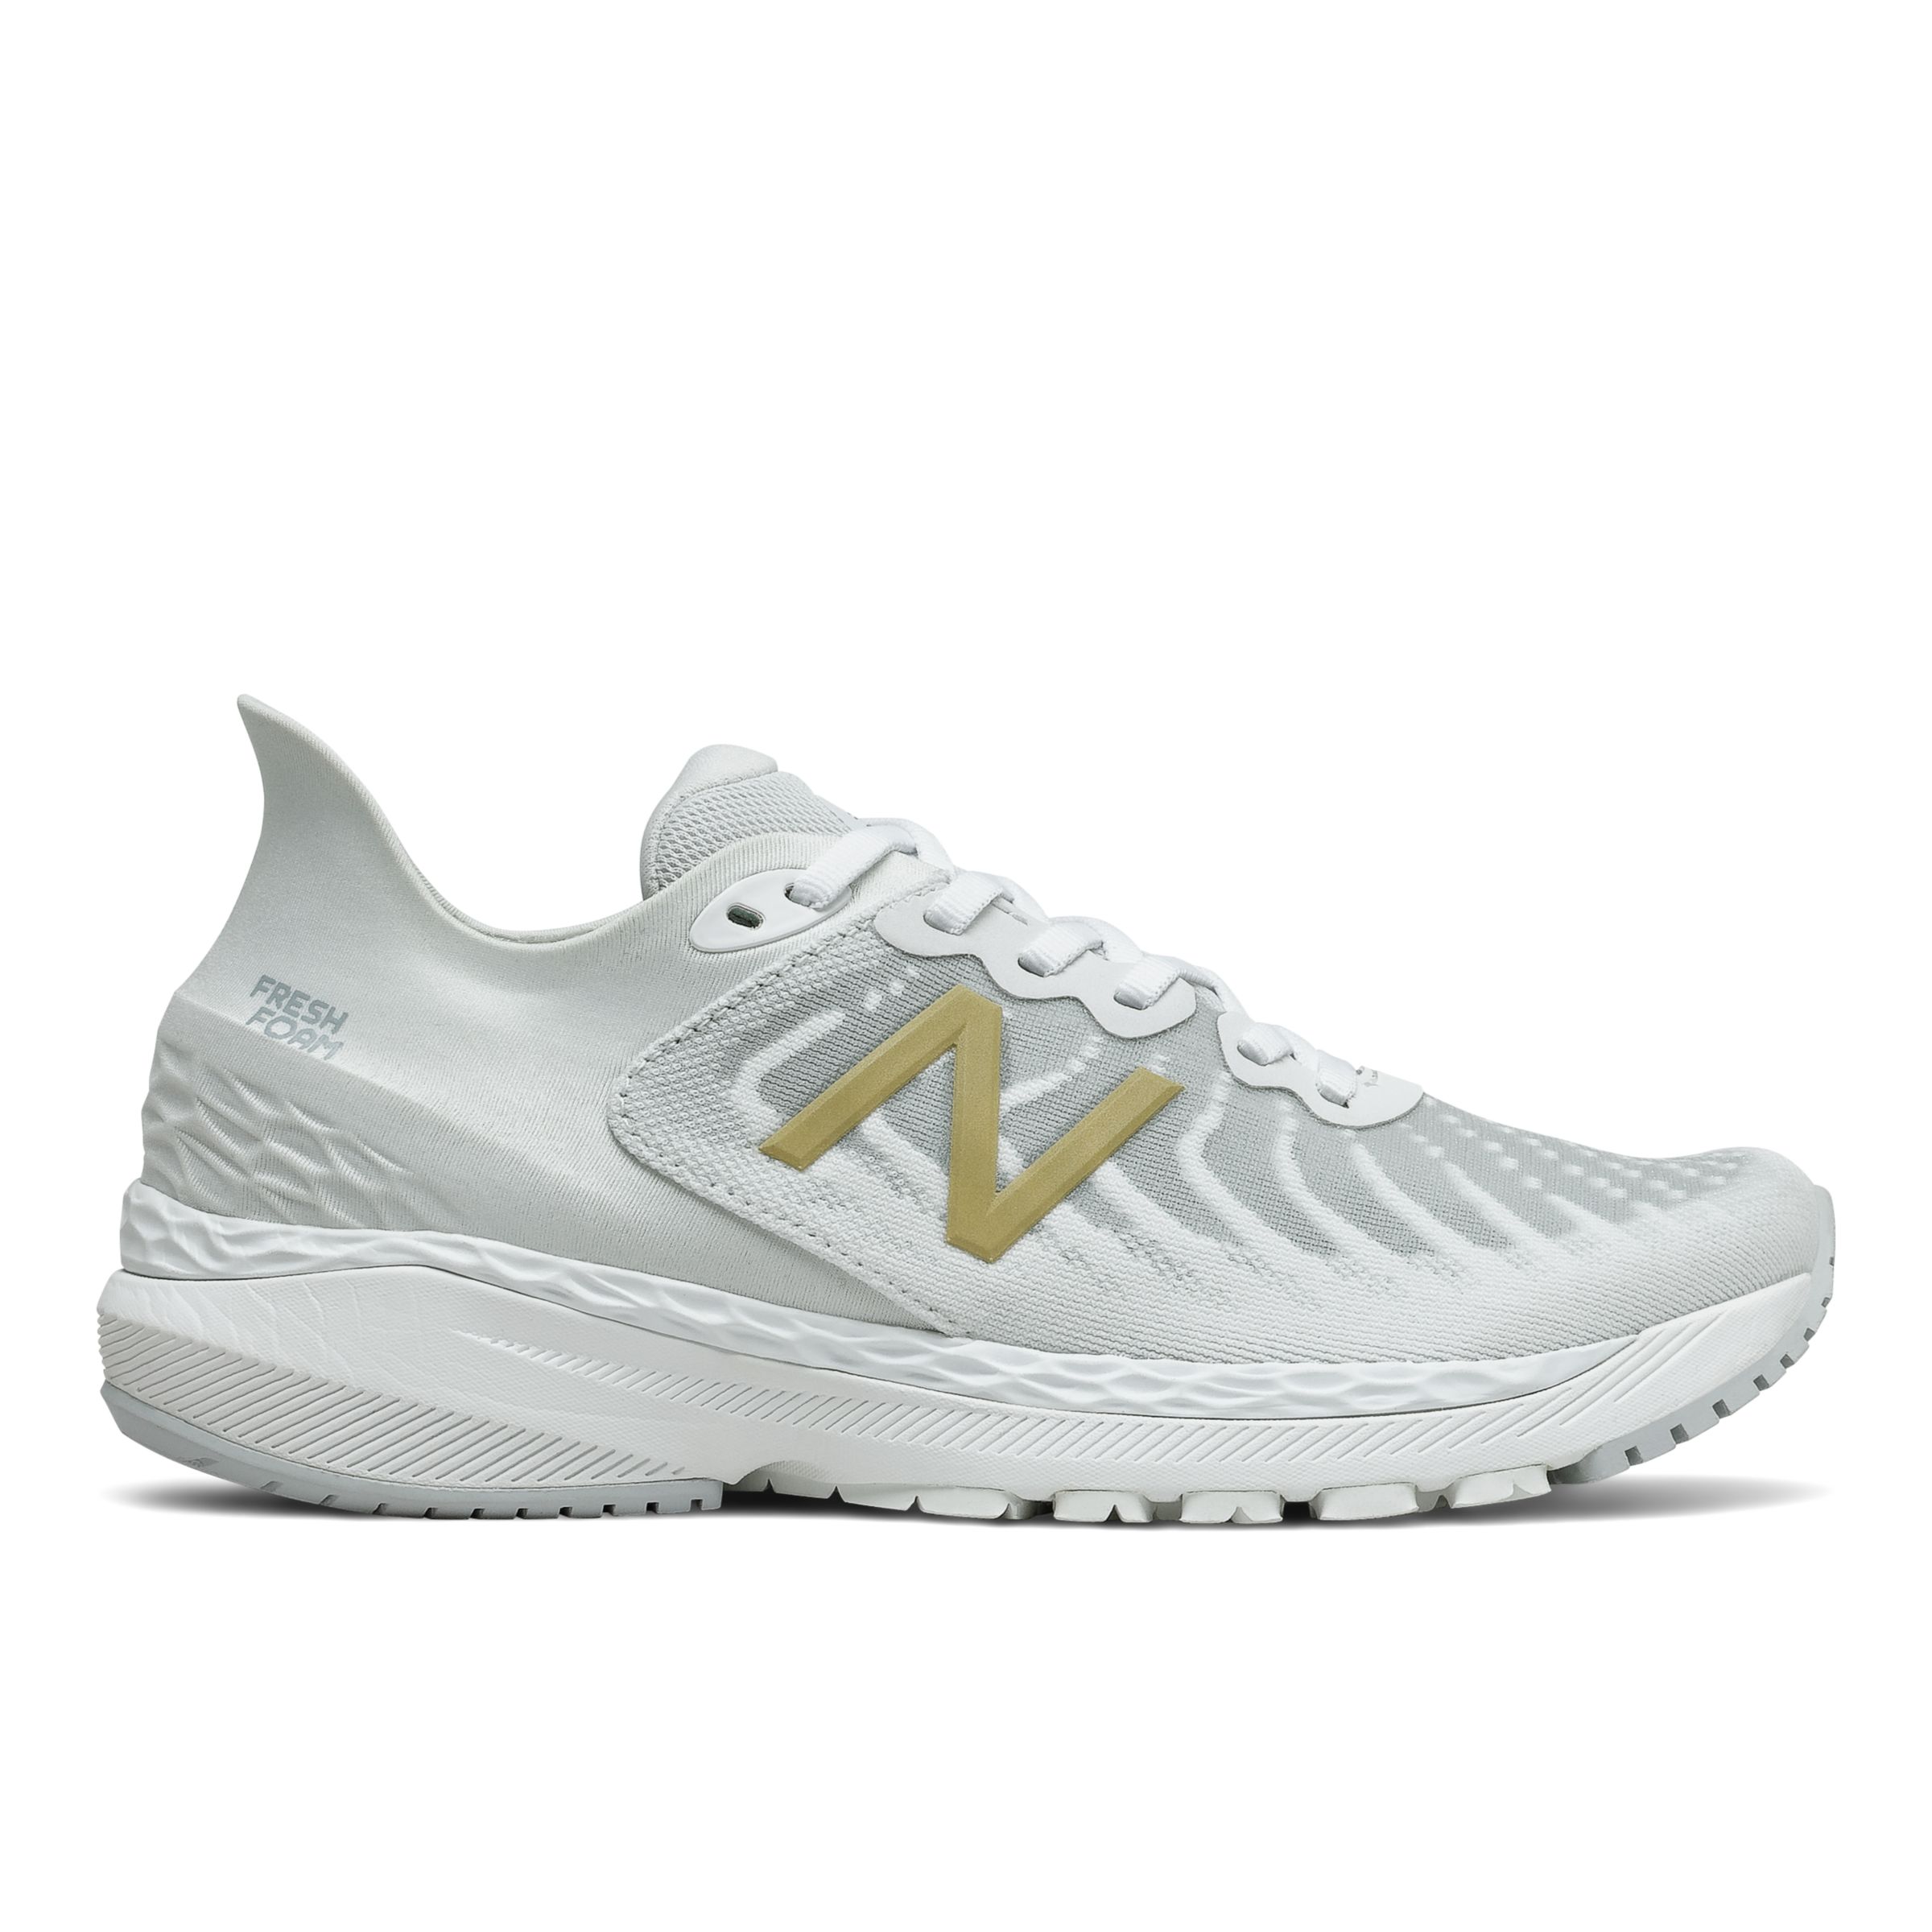 new balance shoes 800 series